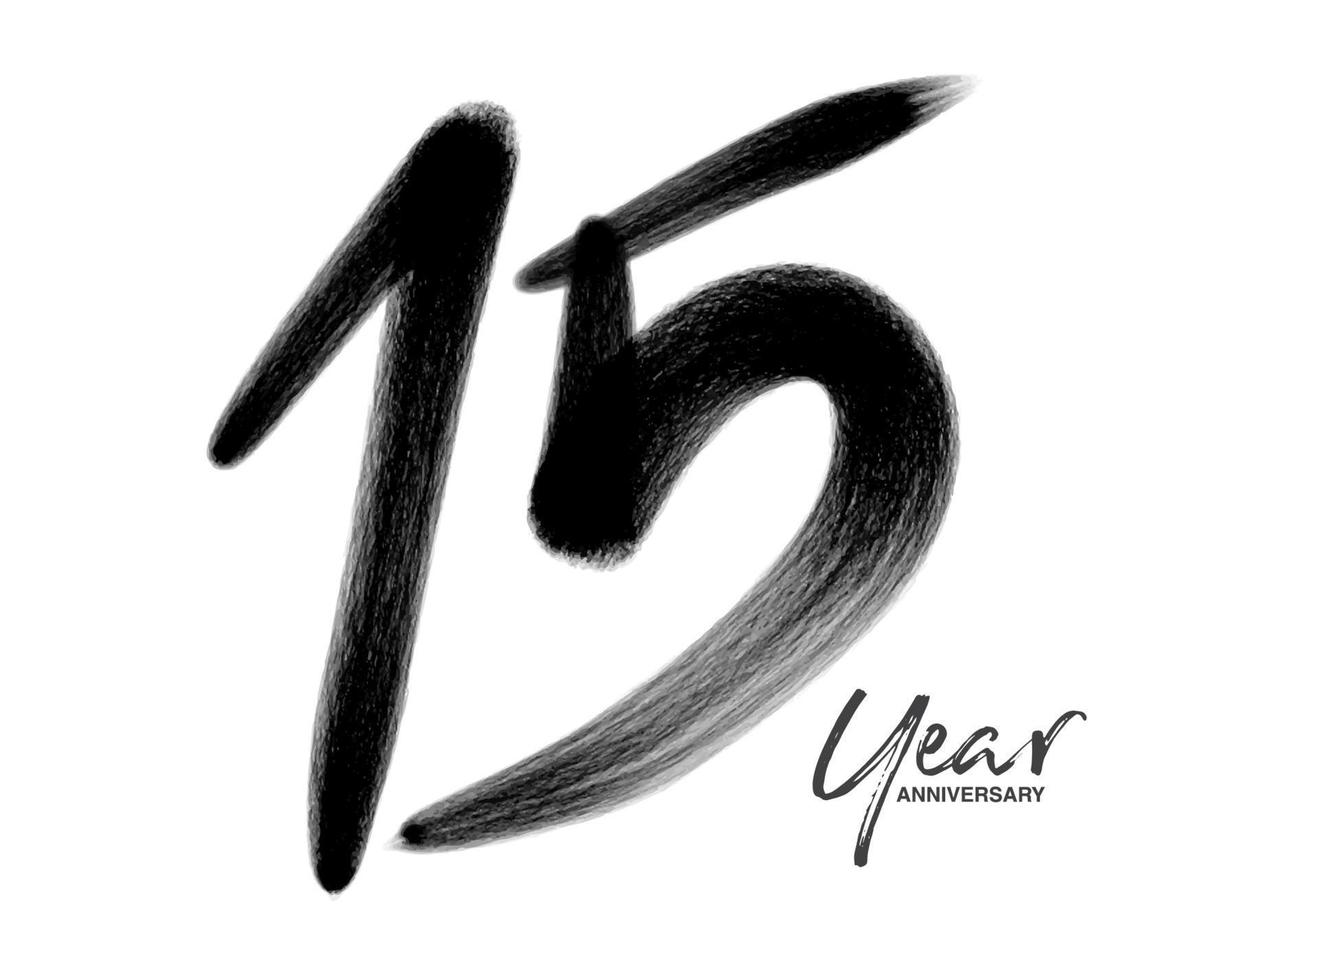 15 Years Anniversary Celebration Vector Template, 15 Years  logo design, 15th birthday, Black Lettering Numbers brush drawing hand drawn sketch, number logo design vector illustration